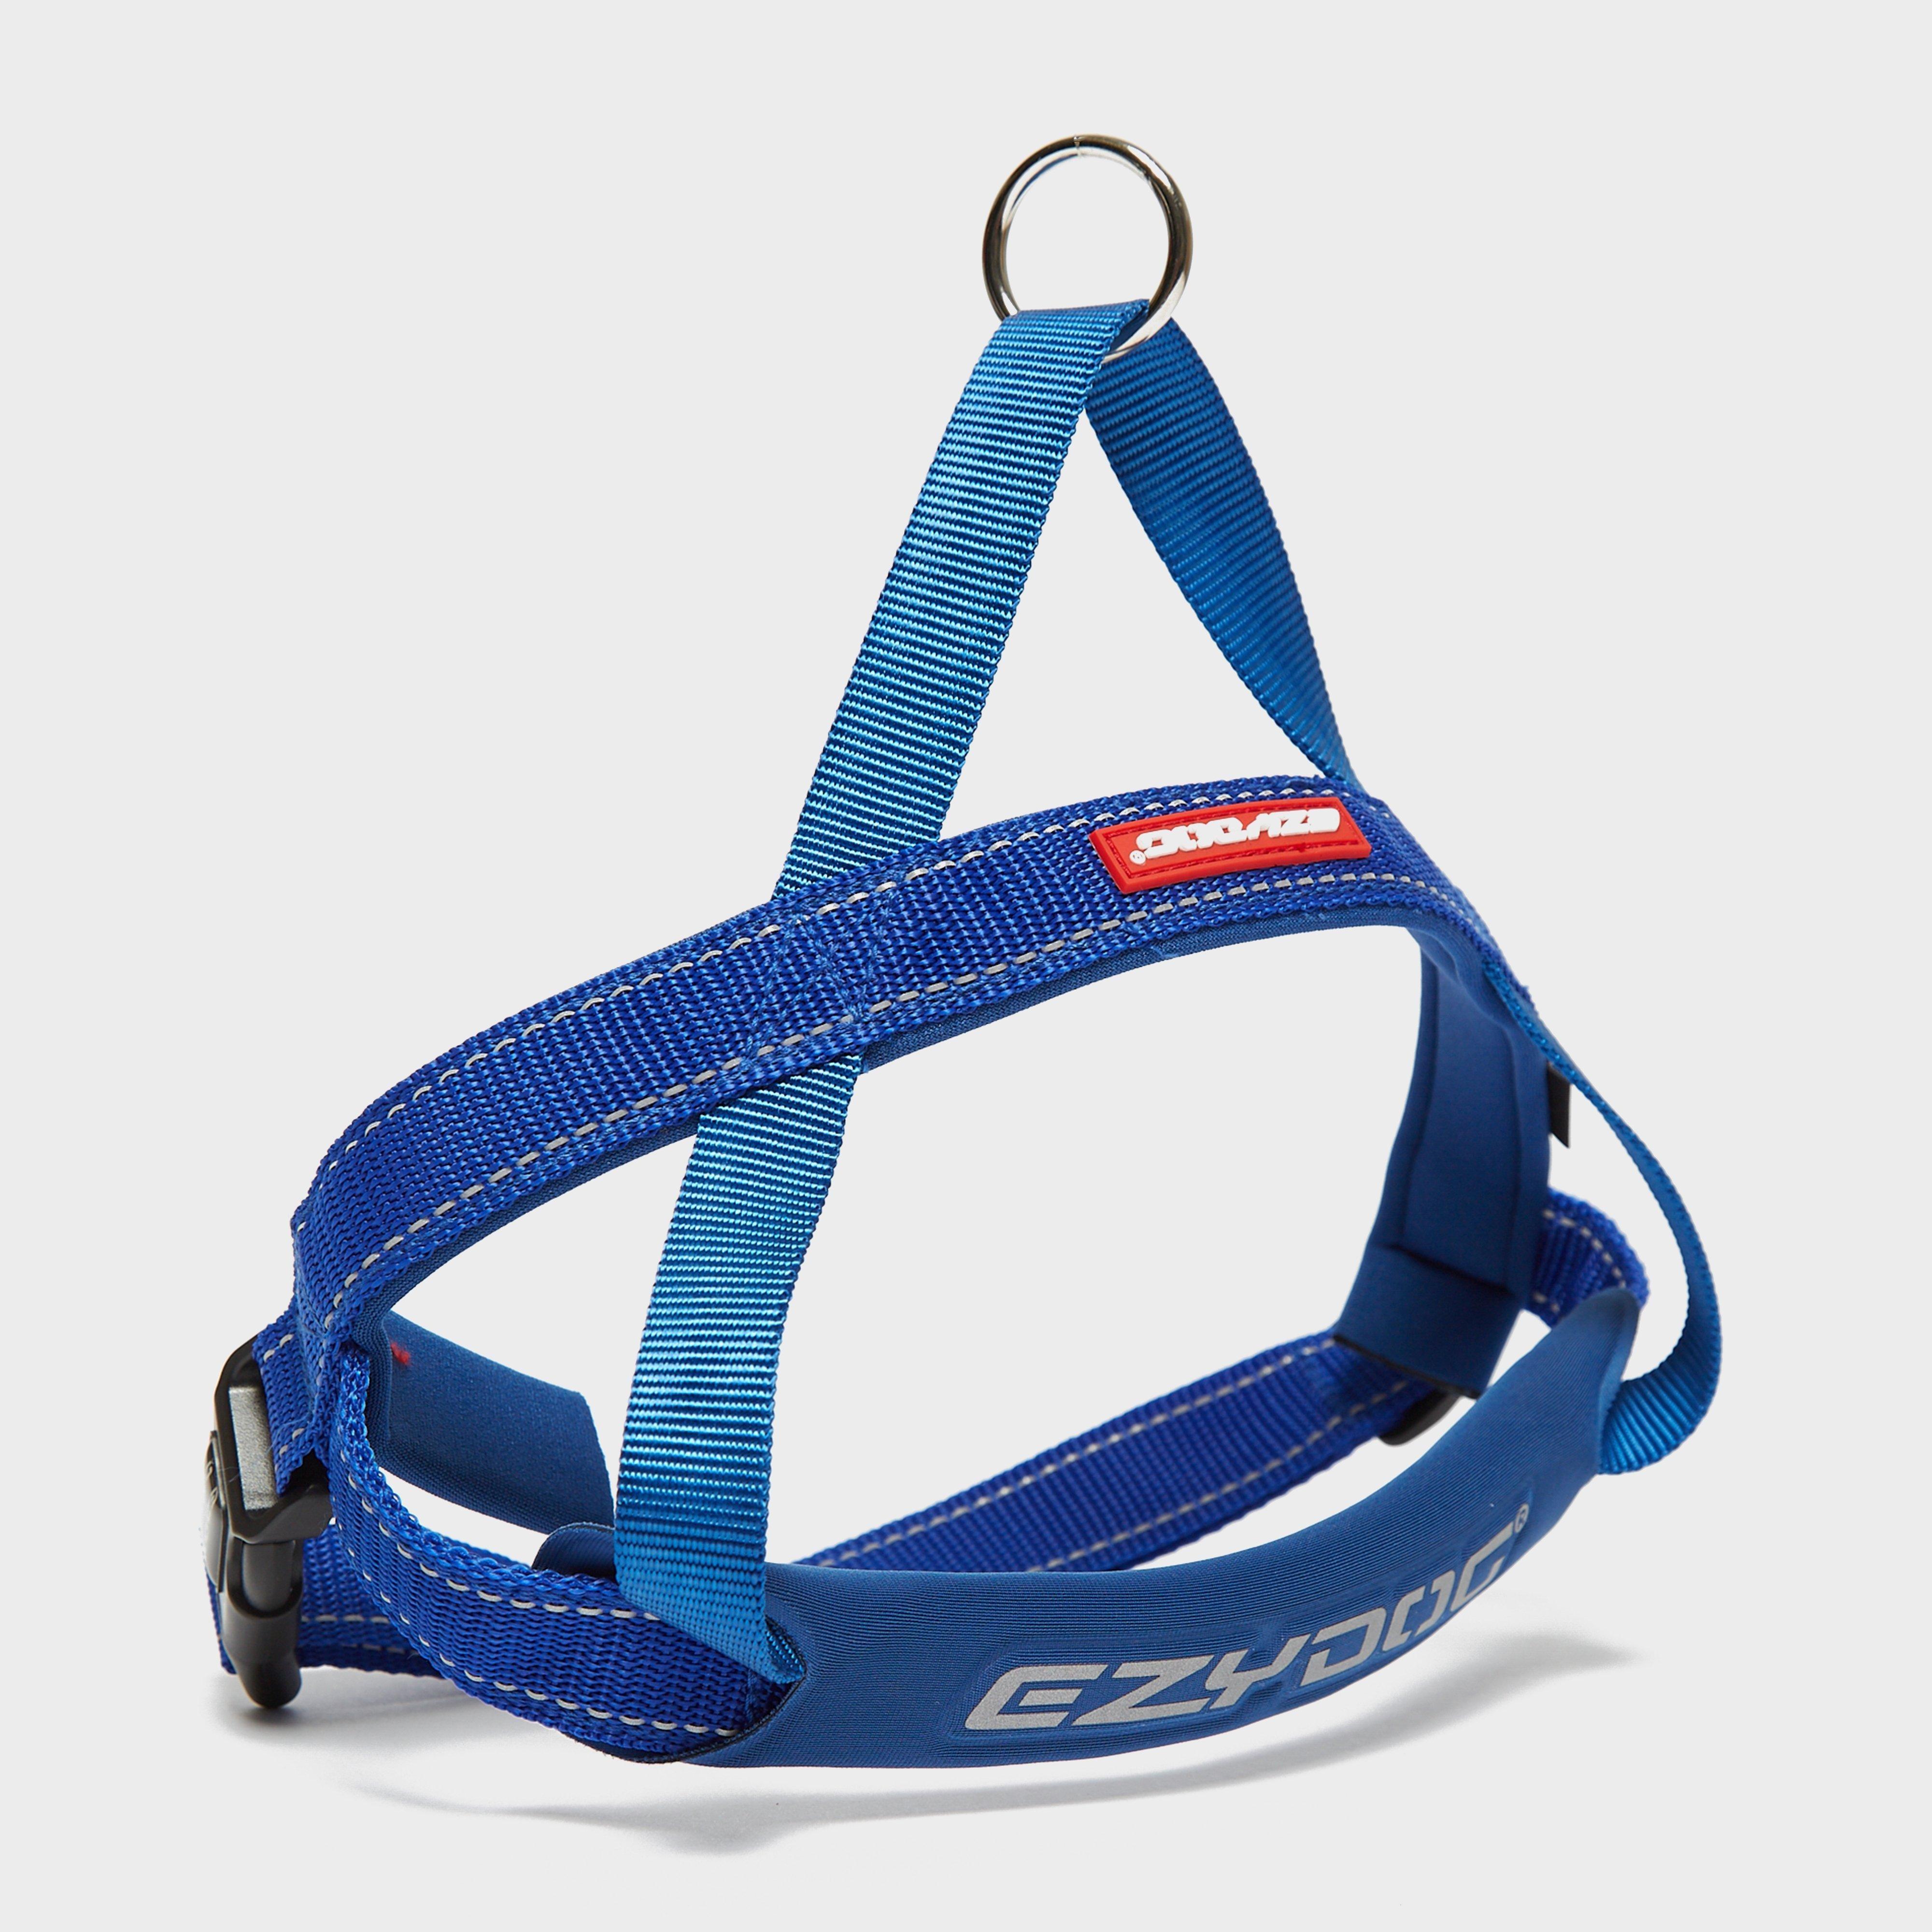 Ezy-dog Quick Fit Dog Harness (large)